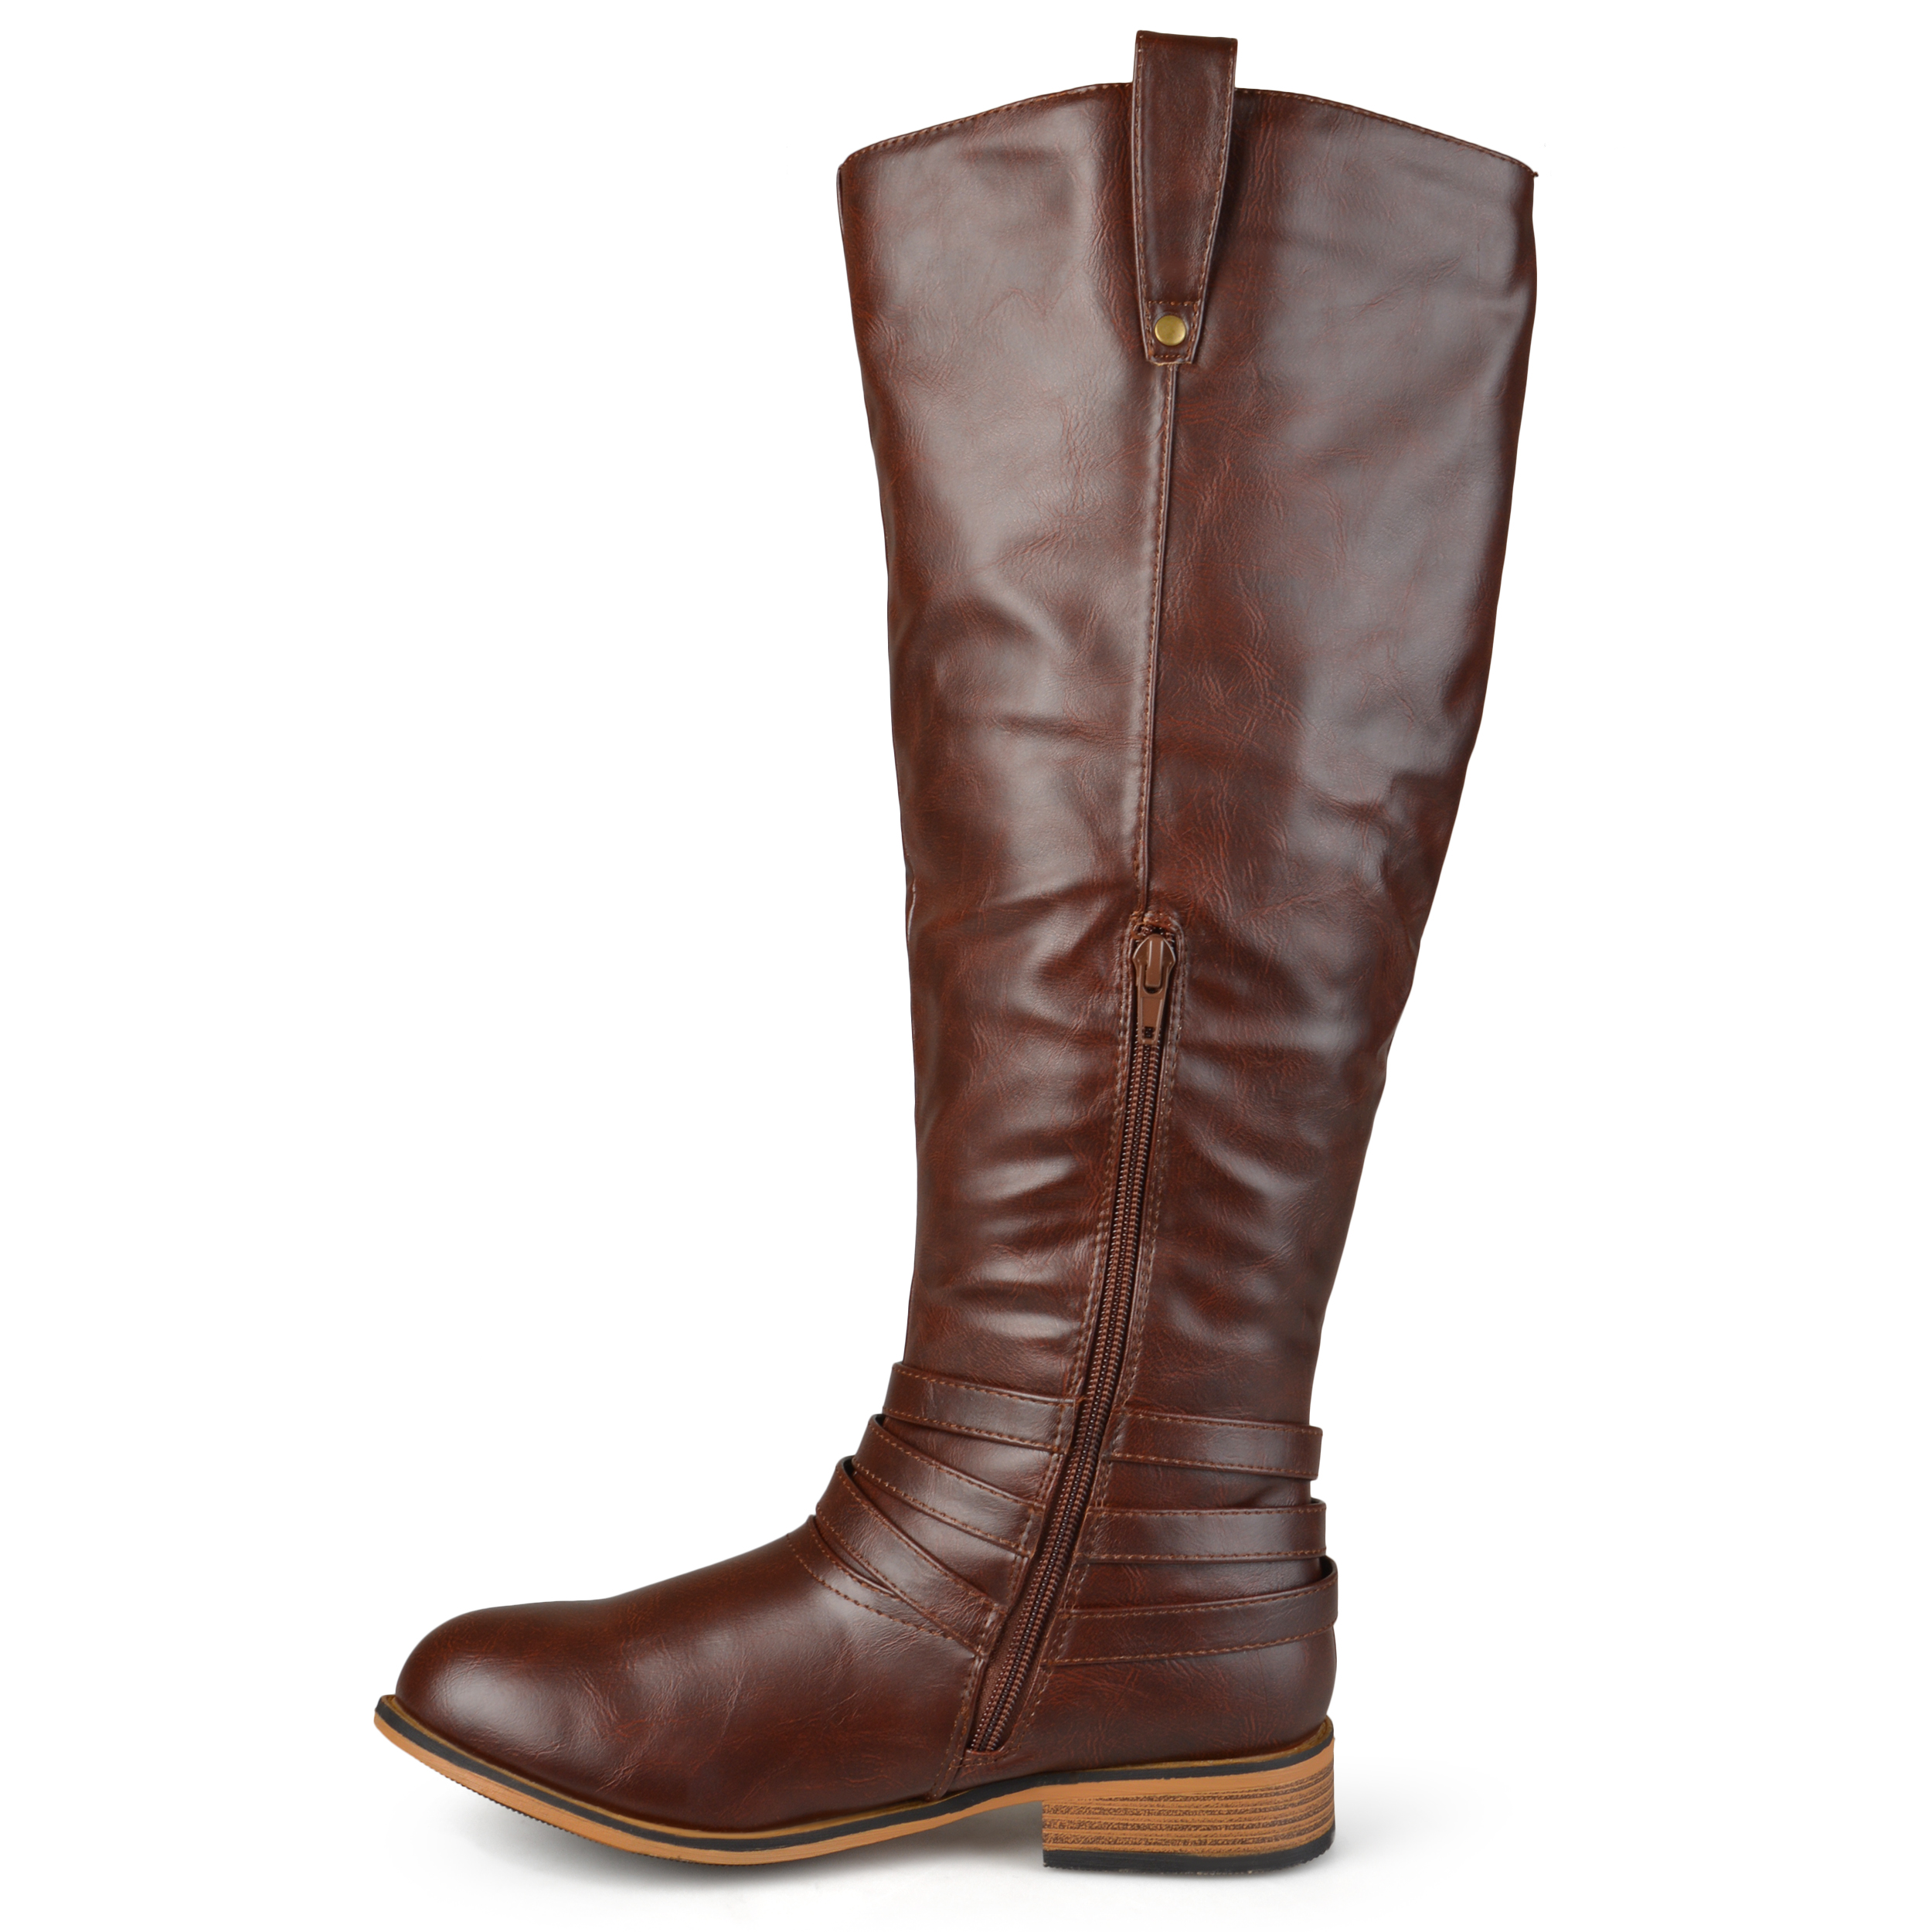 Brinely Co. Women's Mid-calf Wide Calf Riding Boots - image 3 of 9